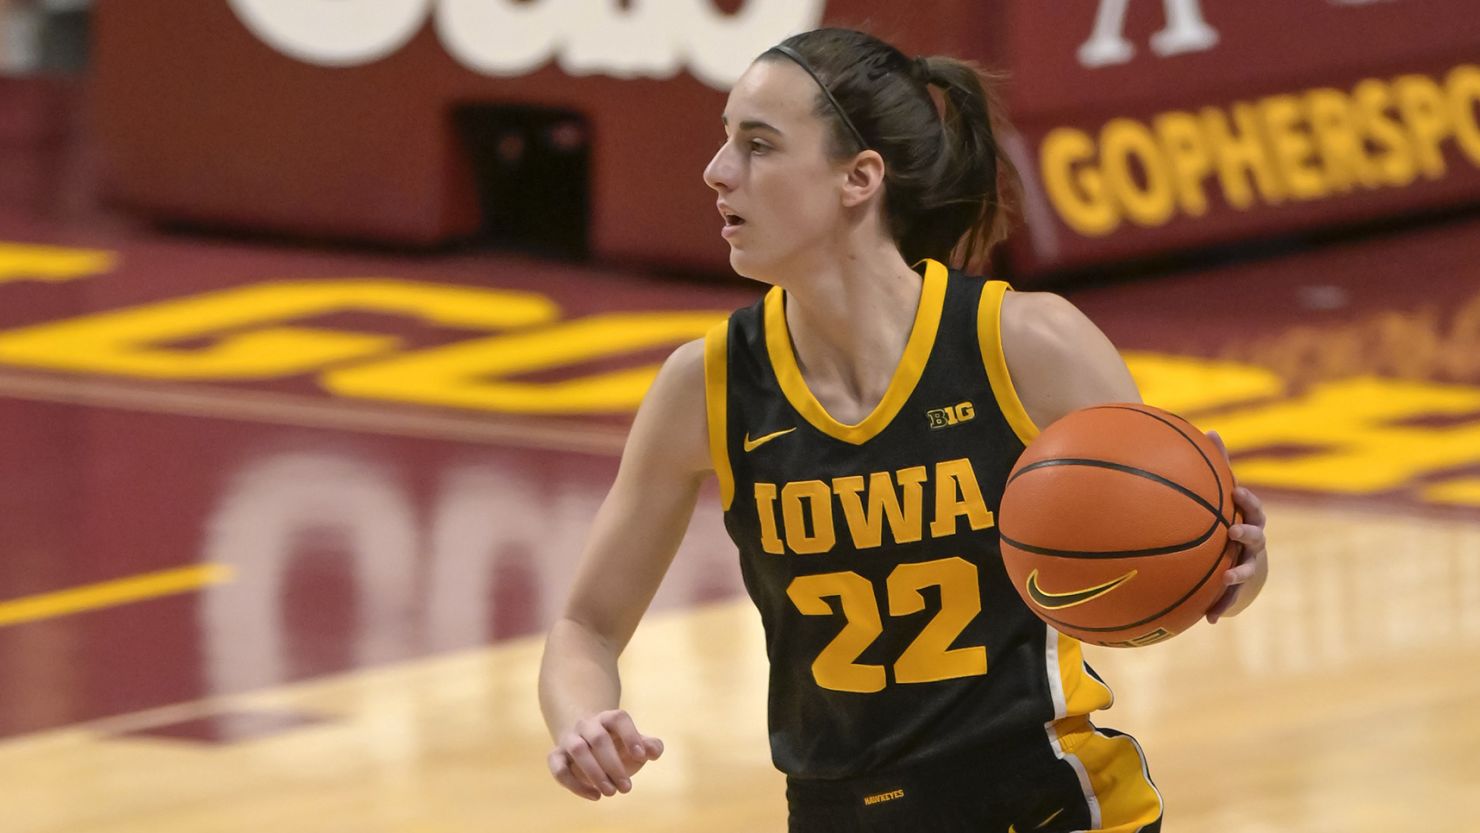 Iowa Hawkeyes guard Caitlin Clark (22) brings the ball up-court against the Minnesota Golden Gophers during the first quarter at Williams Arena.